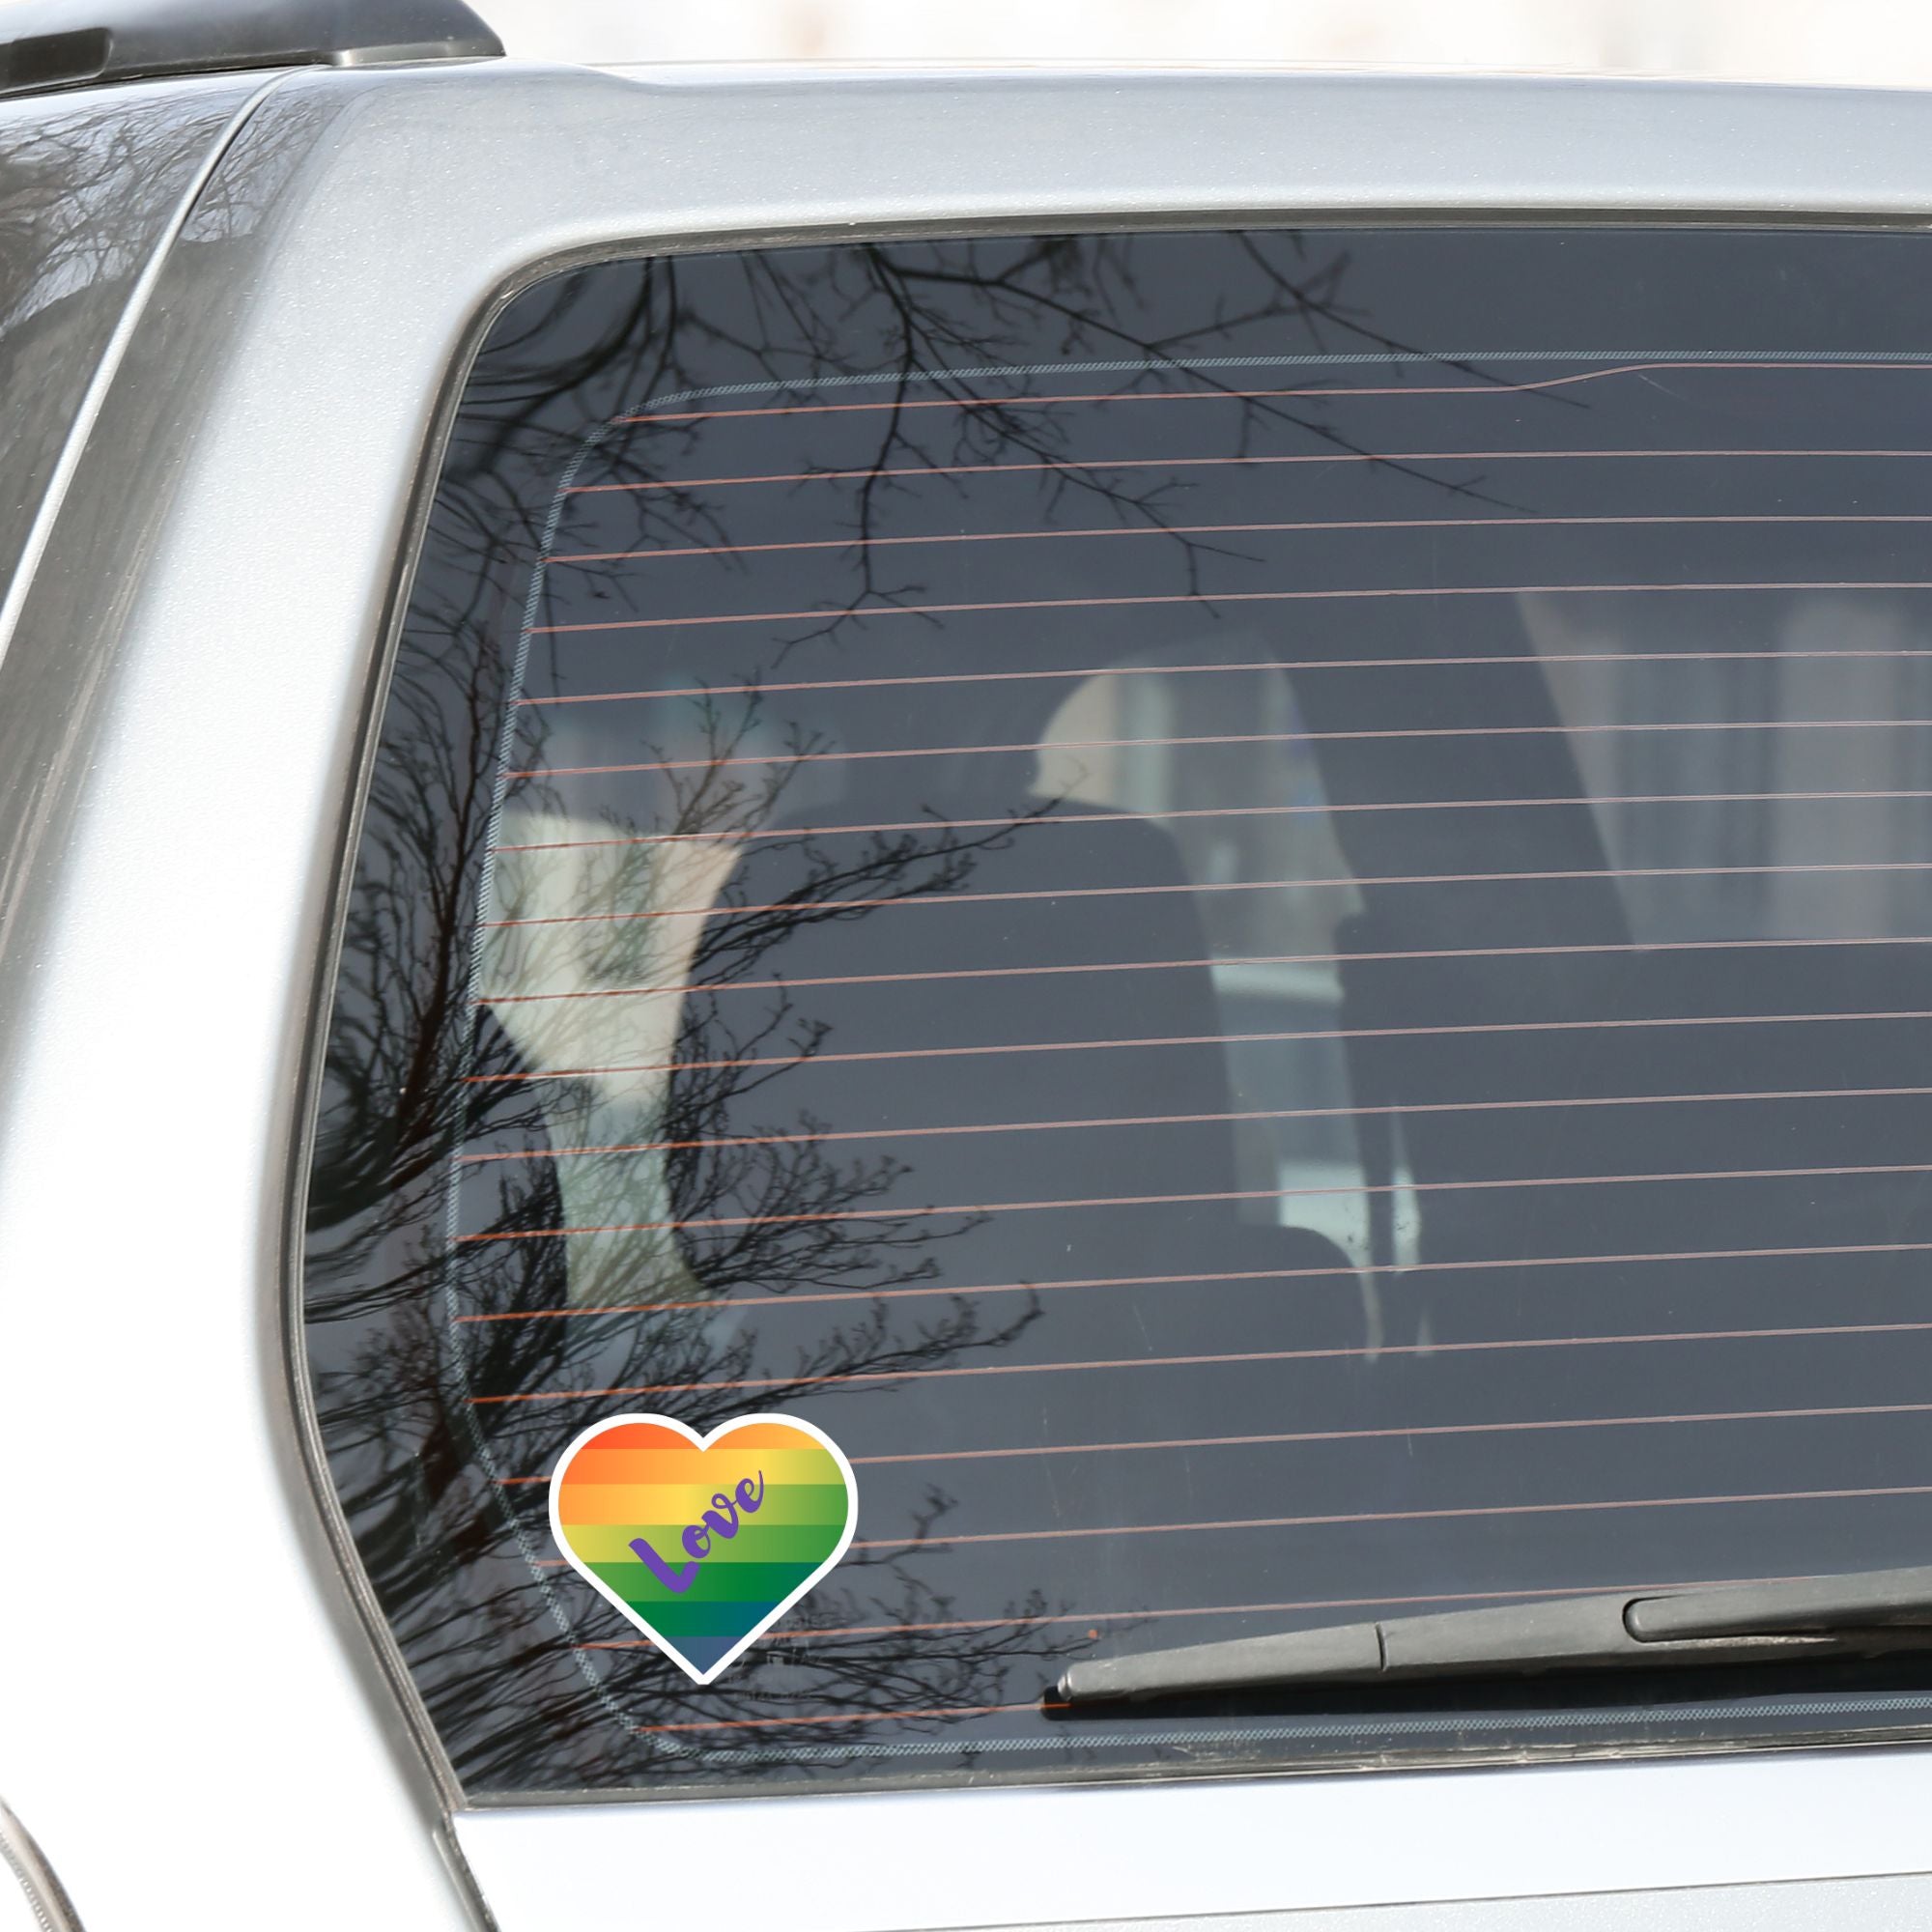 This individual die-cut sticker features a heart shape with graduated colors from orange at the top to blue at the bottom, and the word love written across. Perfect for the people you love! This image shows the Love Heart sticker on the back window of a car.